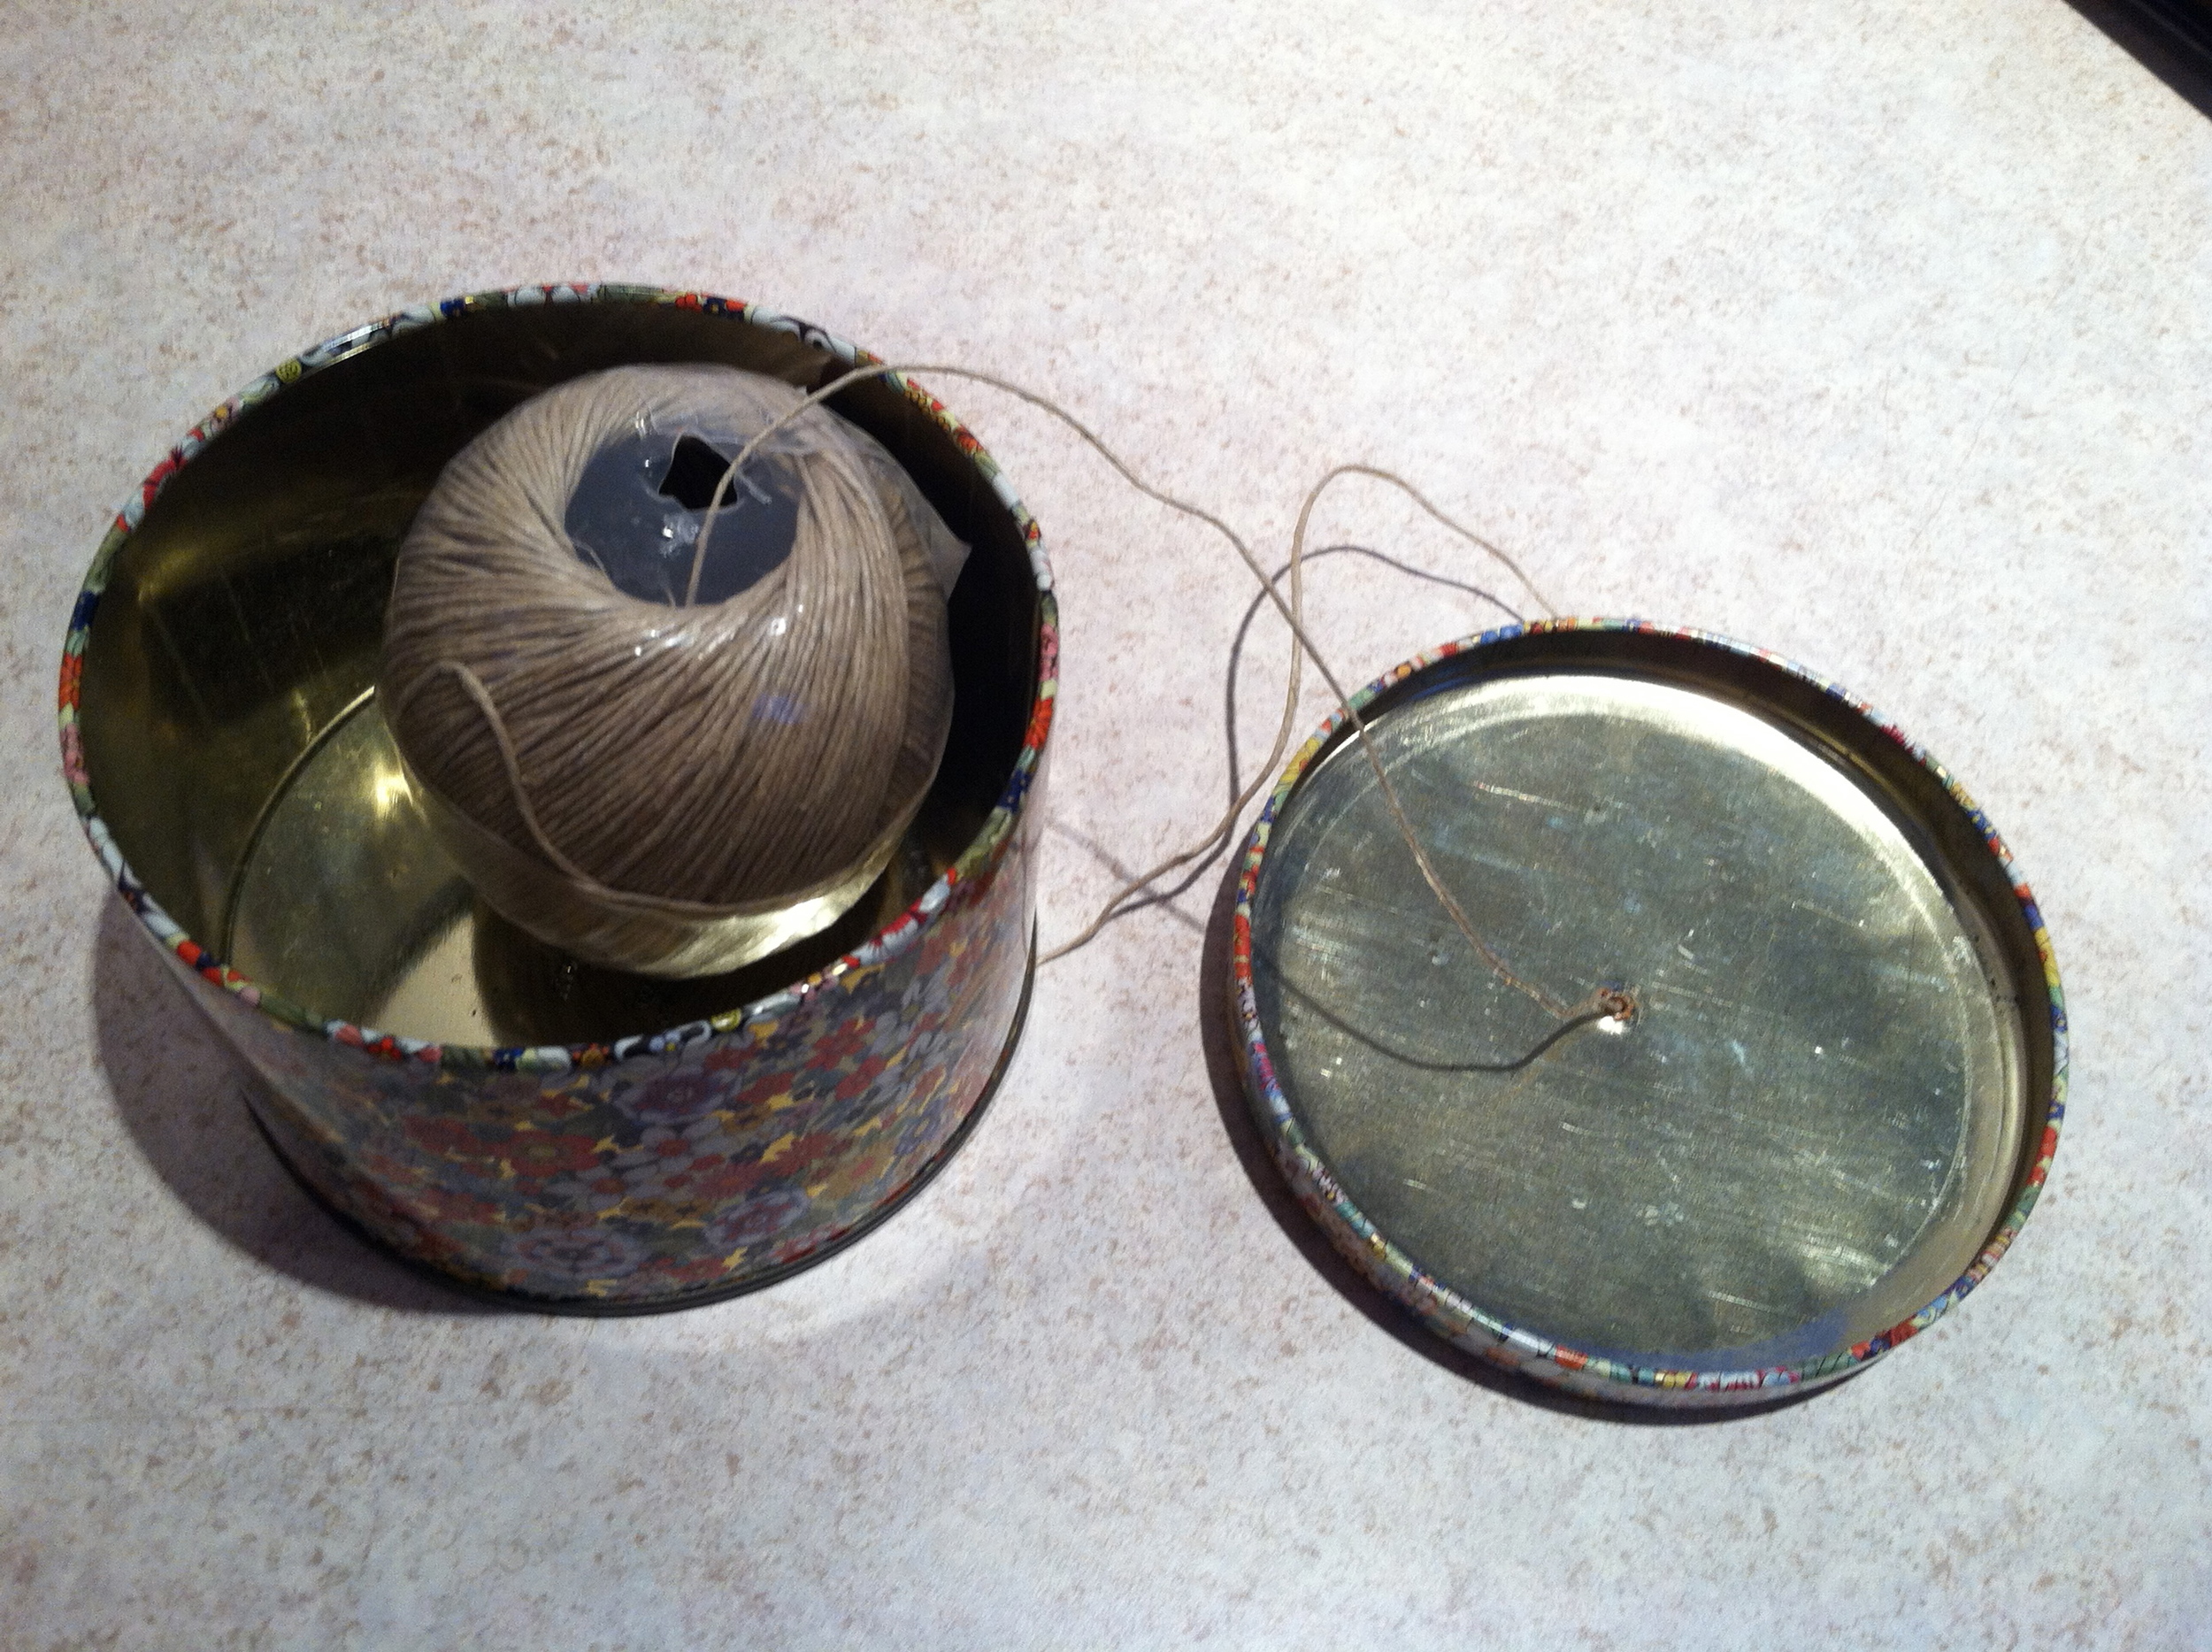  I took a simple tin (purchased for $0.50 at Agape) and punched a hole in the lid. &nbsp;The ball of twine fits perfectly. 